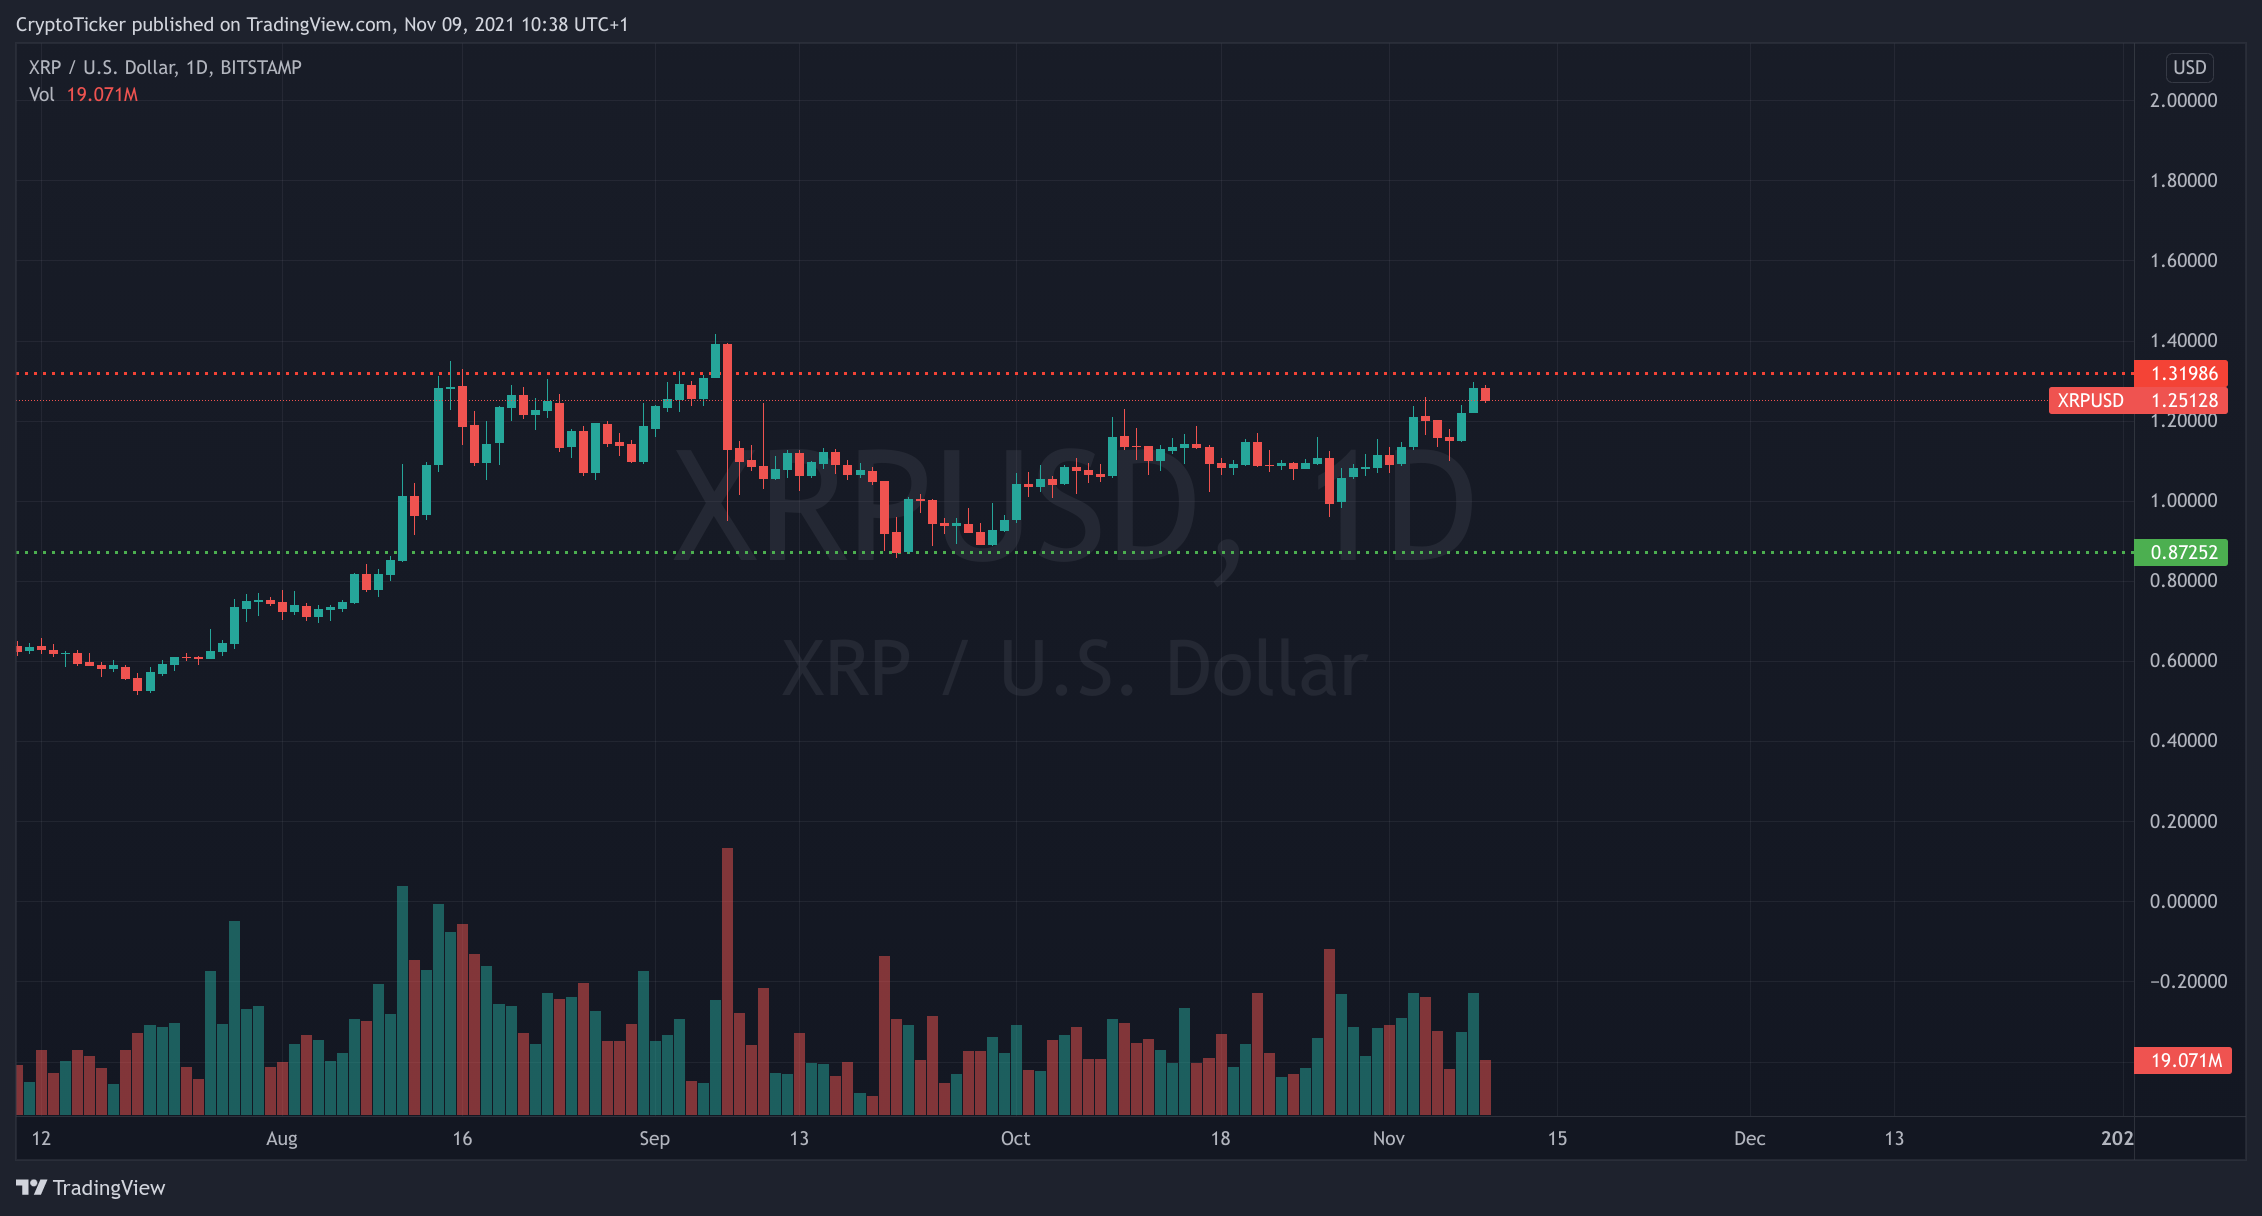 XRP/USD 1-day chart showing a sideways trend